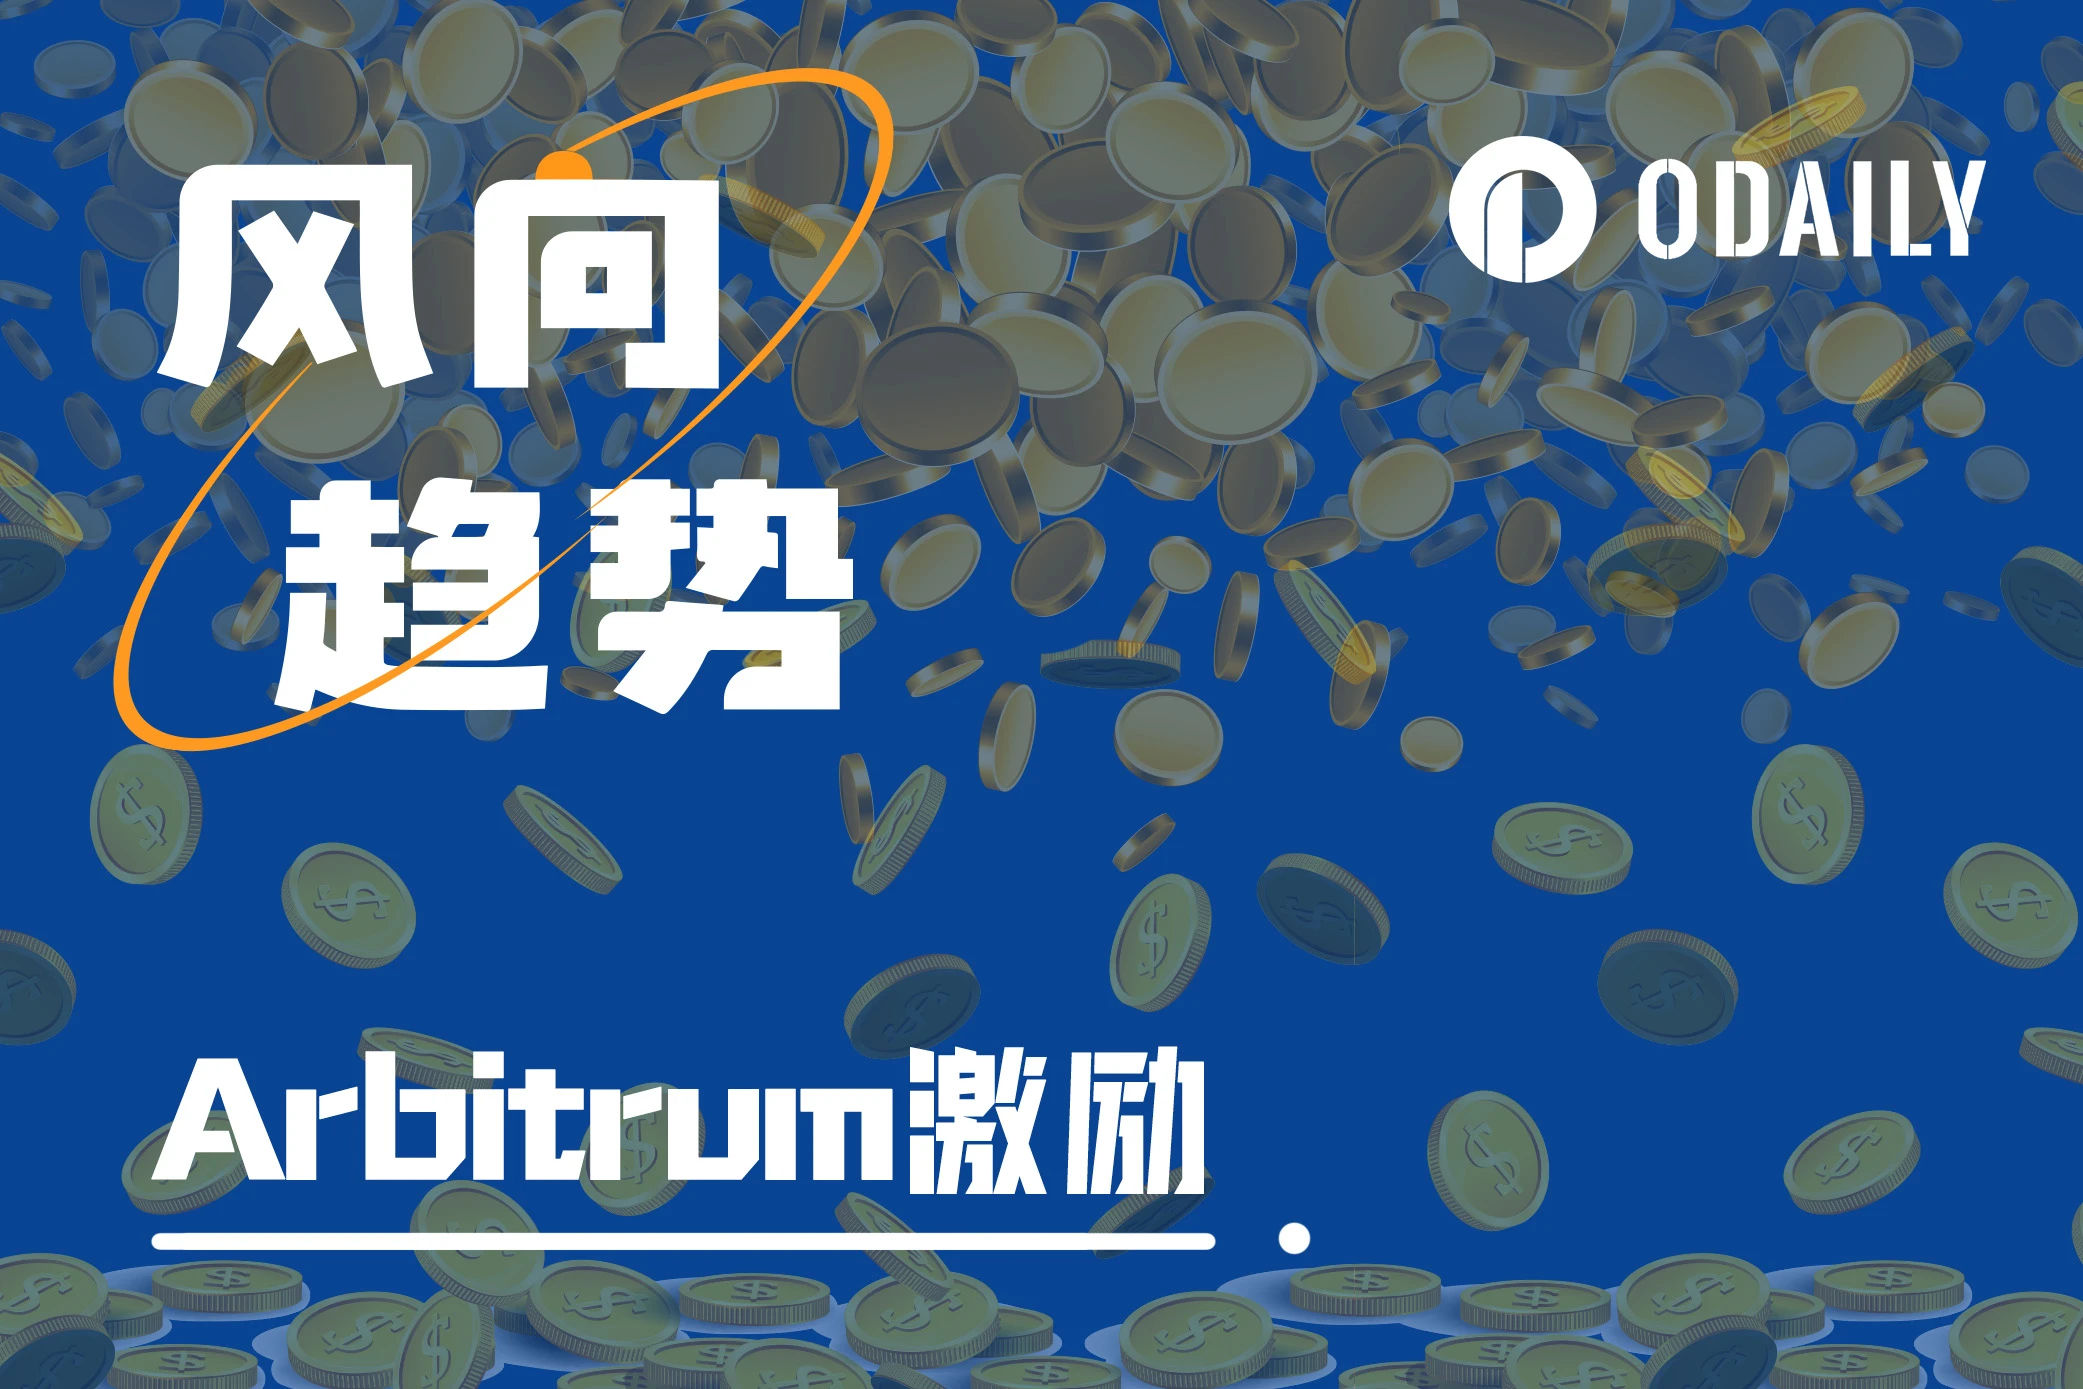 The Arbitrum project is launched with money disbursement, and the incentive plan and intensity are explained in detail